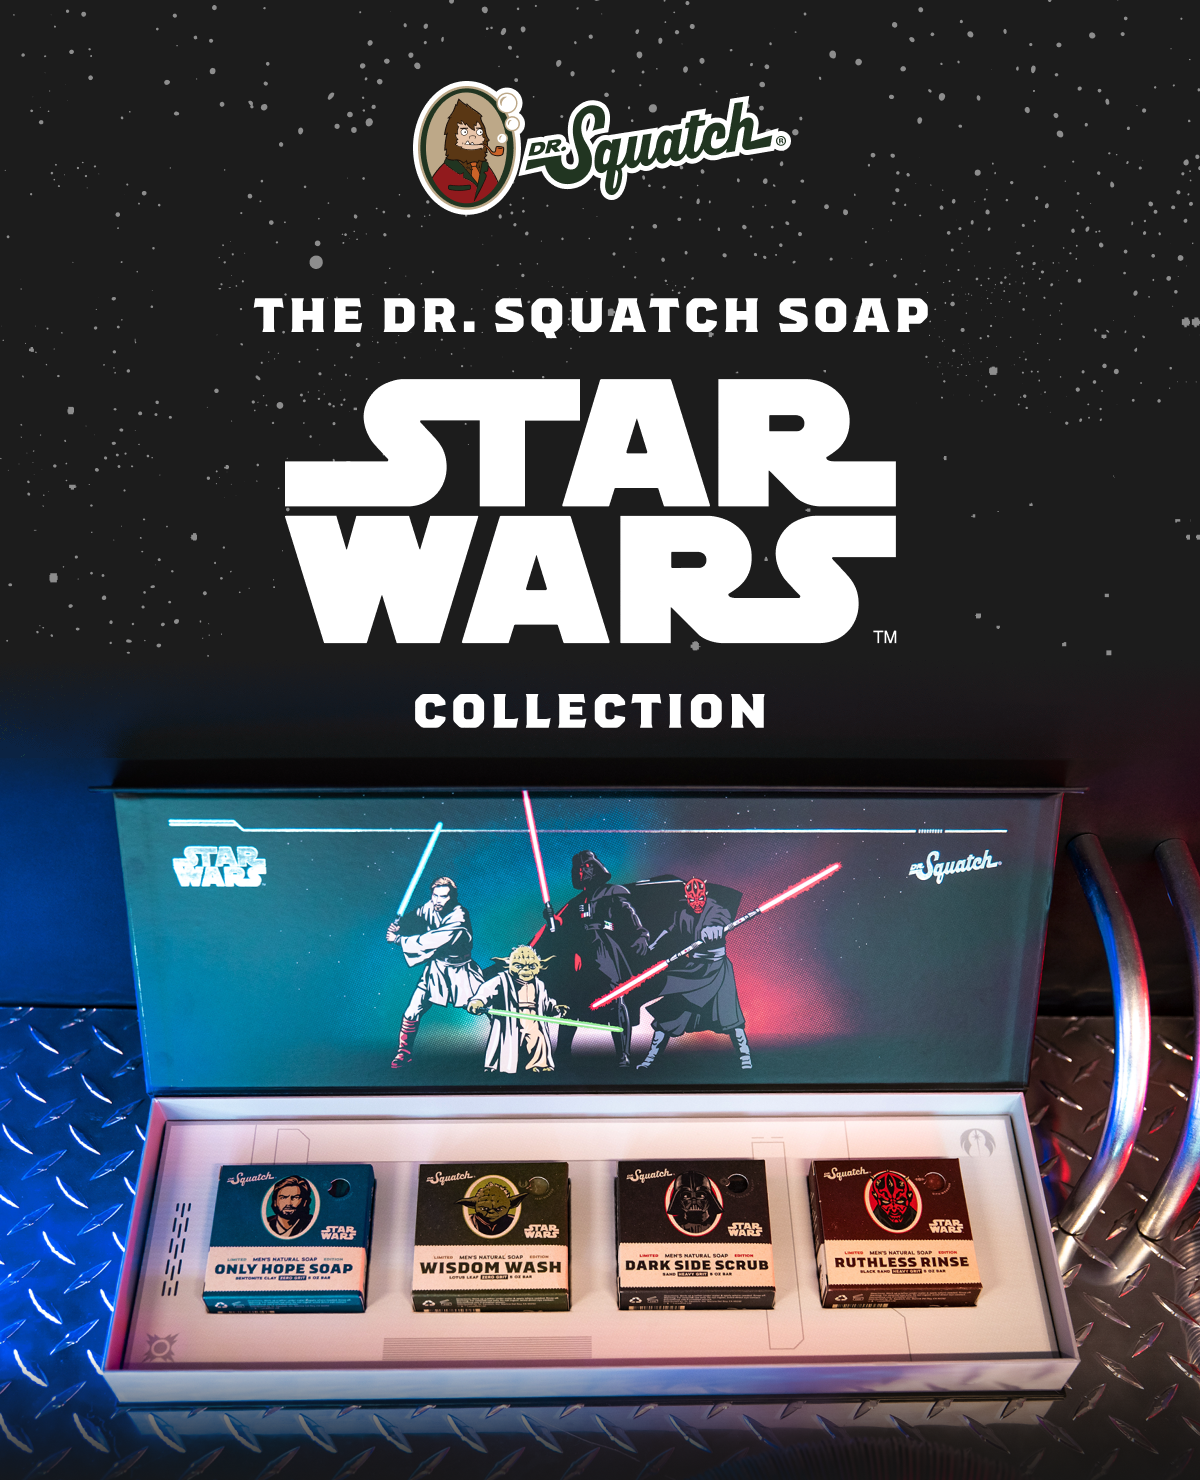 The Star Wars™ Soap Saver - Dr. Squatch